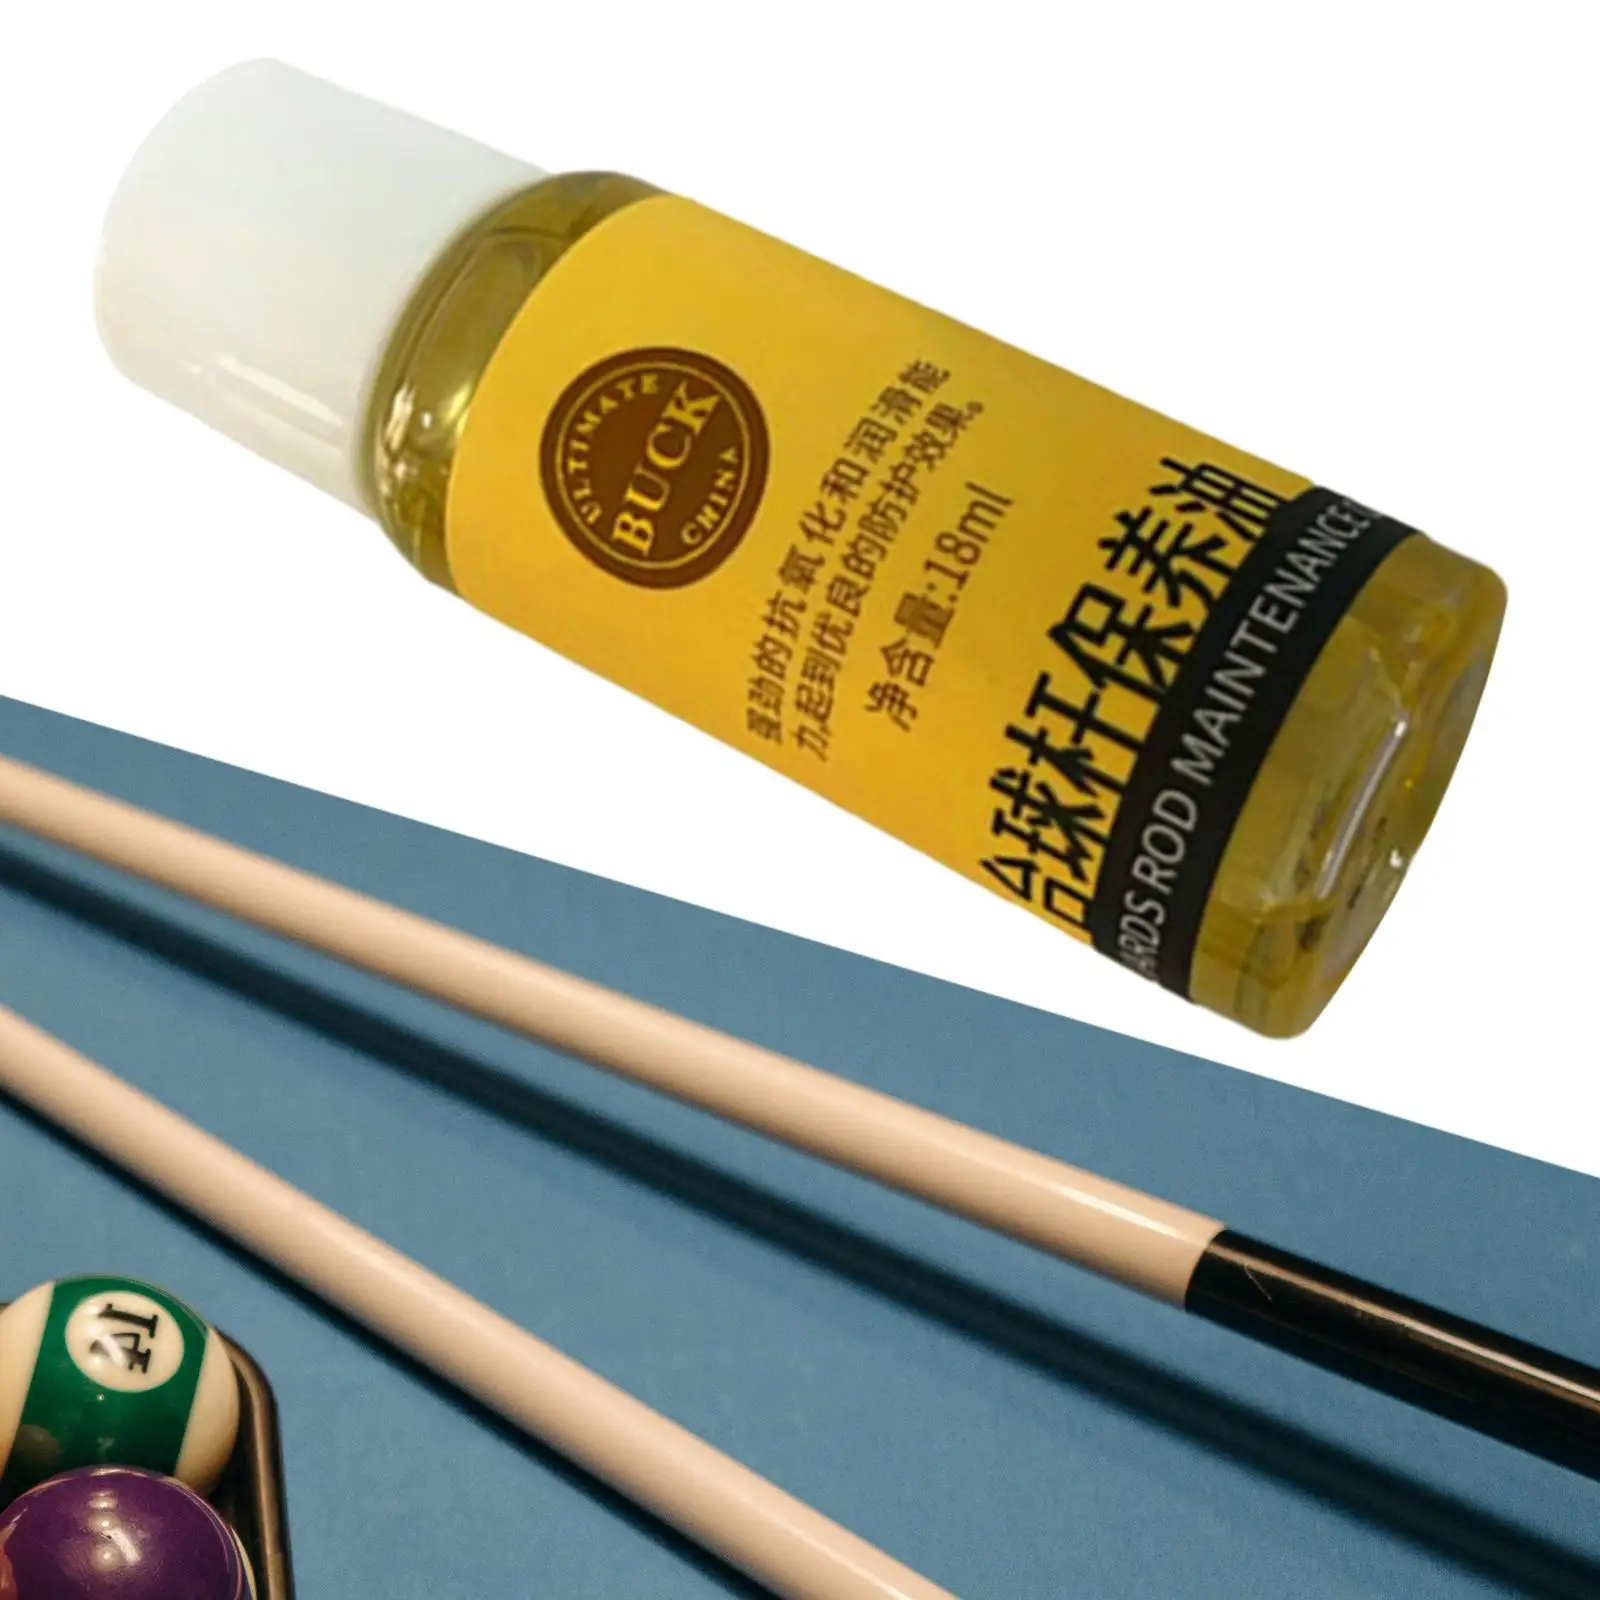 Billiards Rod Oil Portable Maintenance Oil for Ball Clubs for Training Outdoor Sports Beginners Enthusiasts Billiards Pool Cue